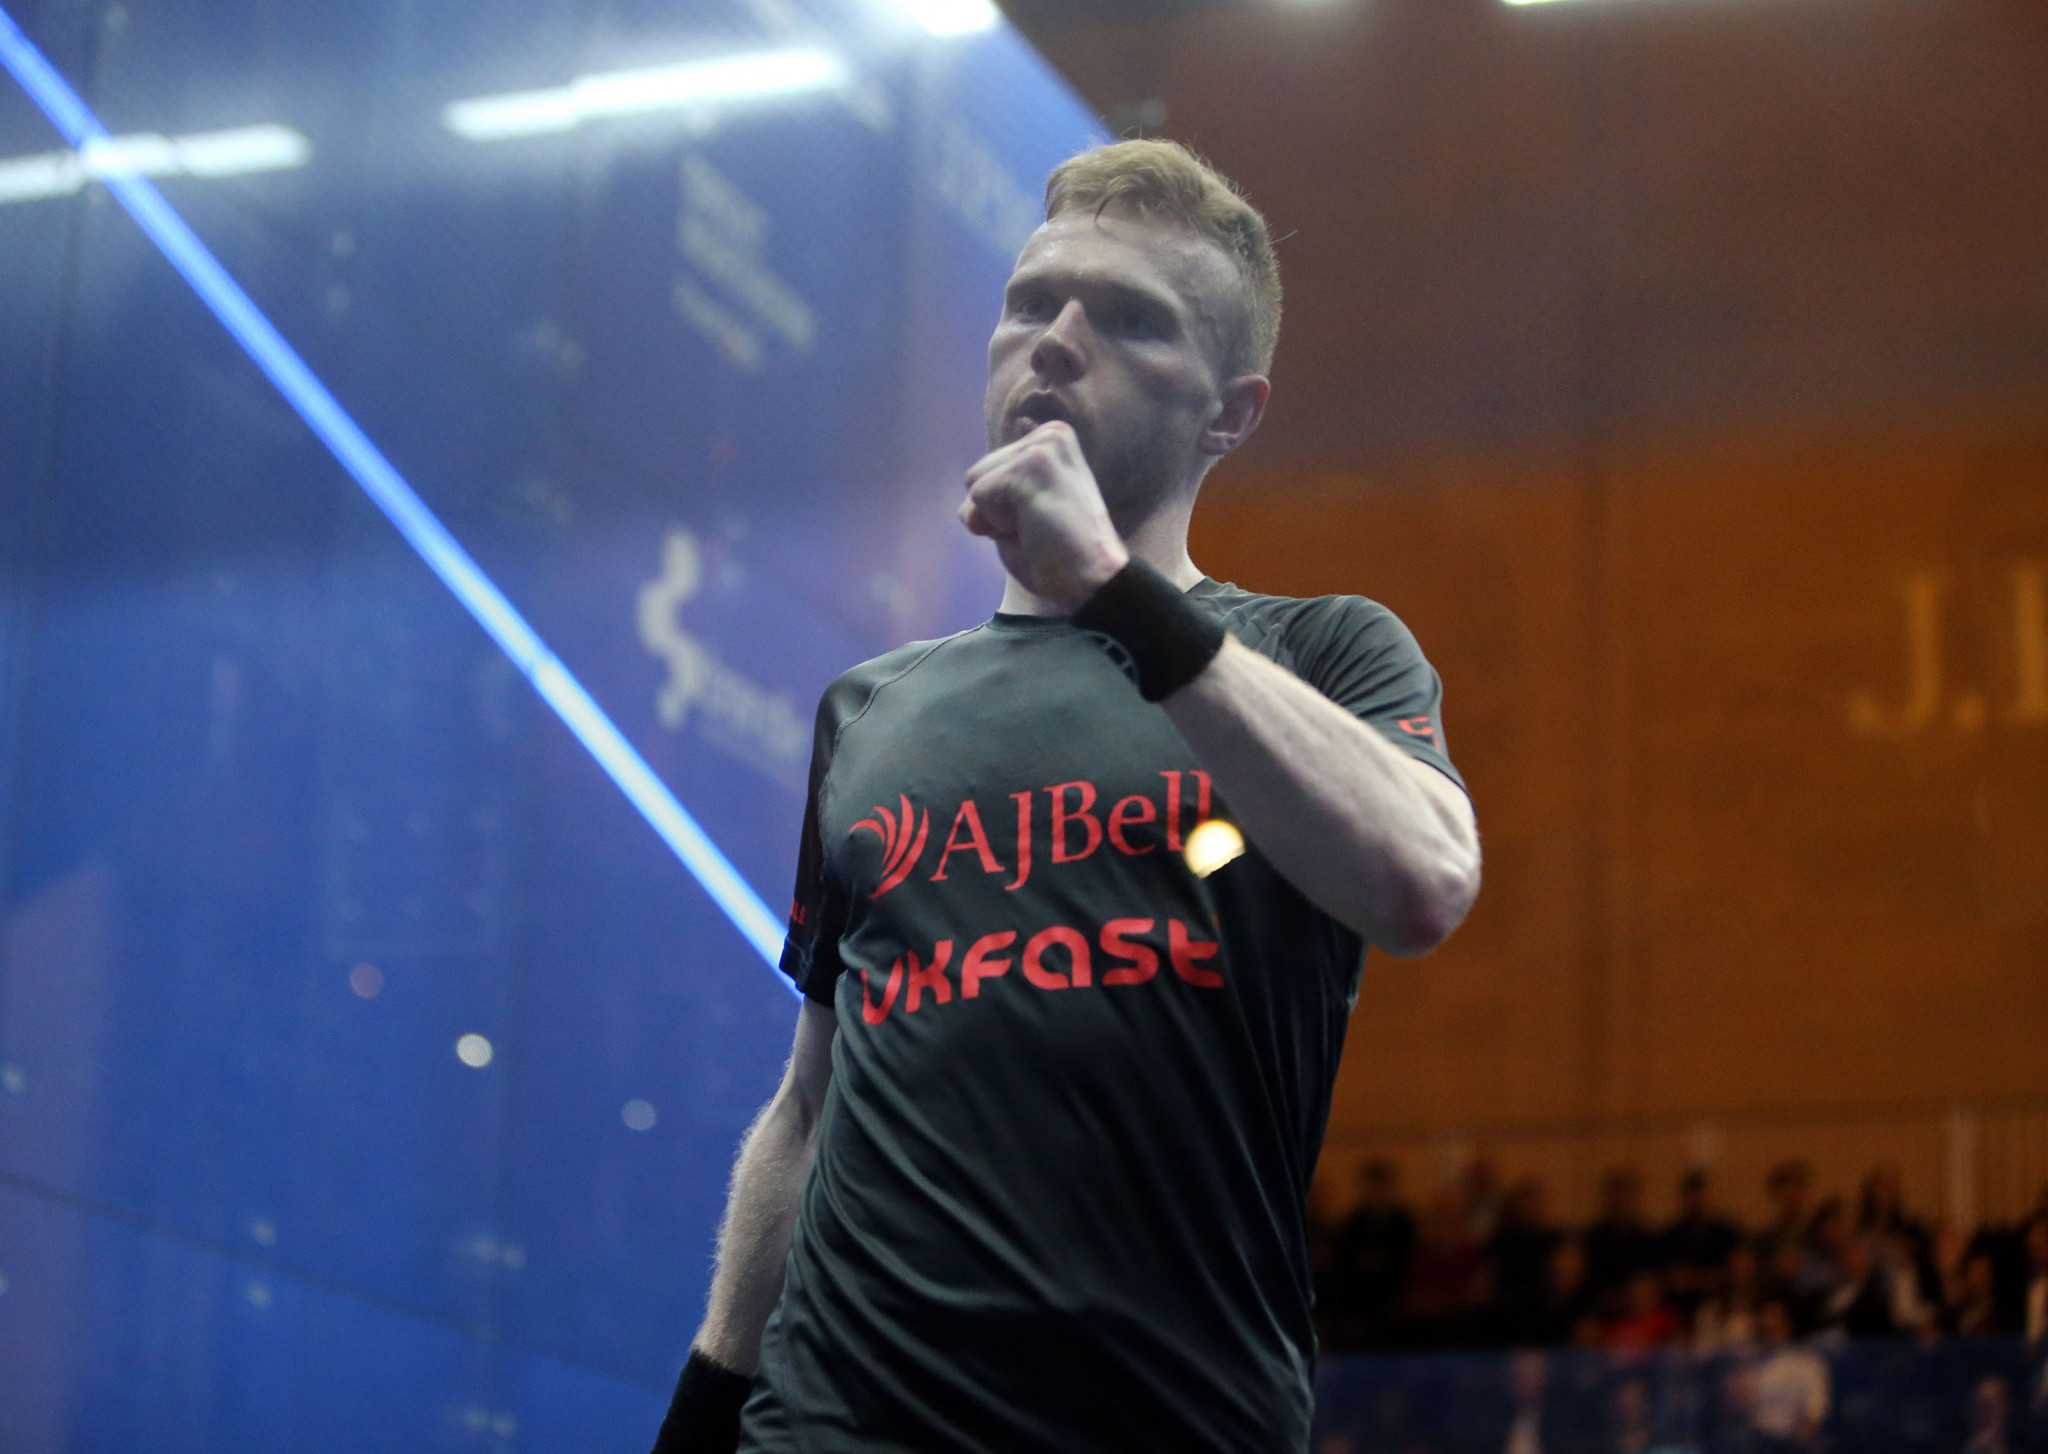 Joel Makin of Wales reached the quarter-finals in New York ©PSA